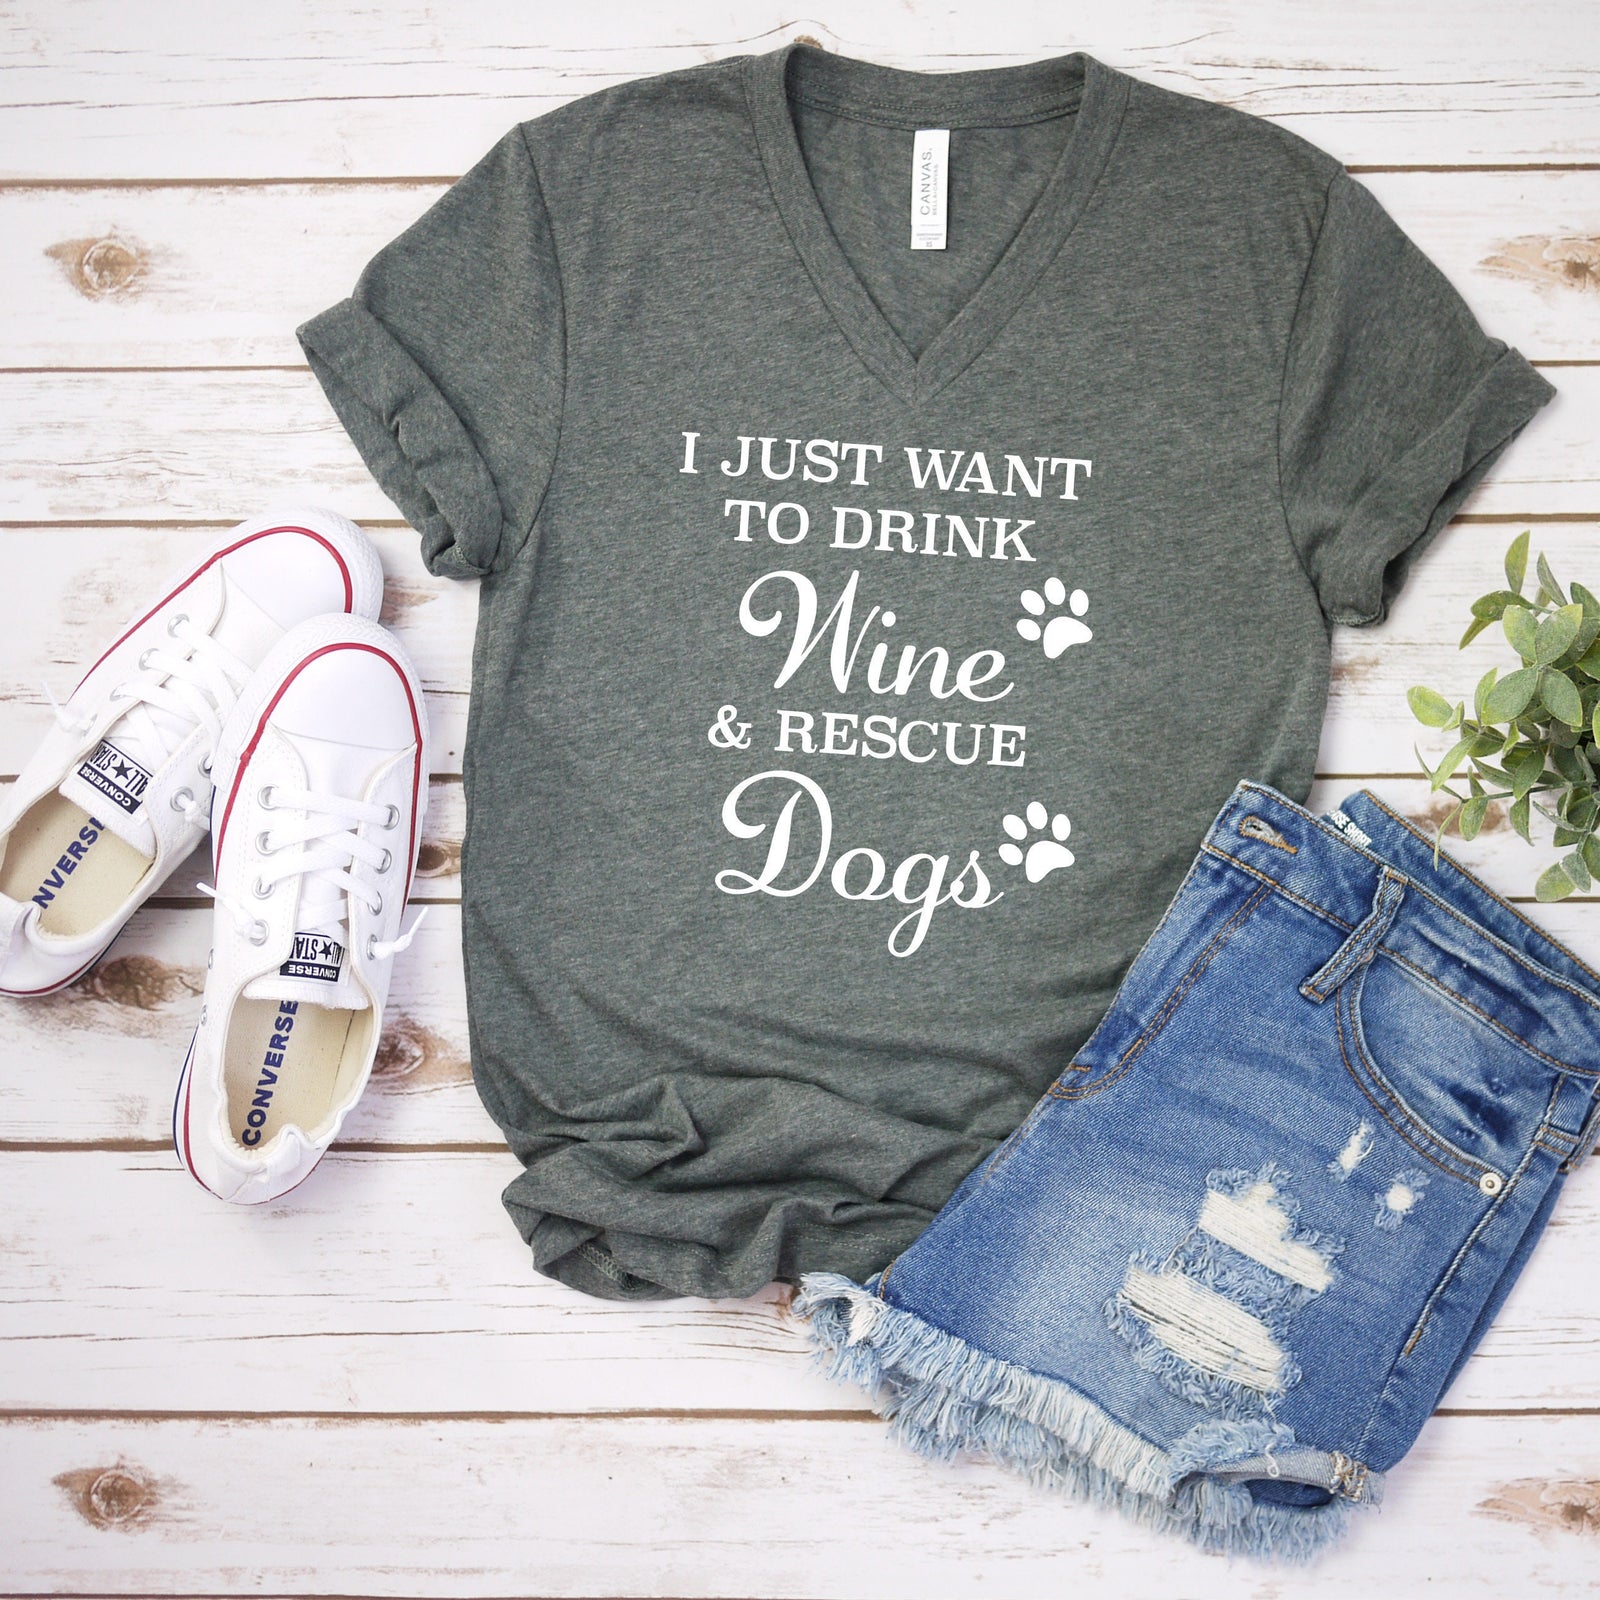 I Just want to Drink Wine and Rescue Dogs T Shirt - Dog Lover - Pet Rescue T Shirt - Funny Dog Mom Shirt